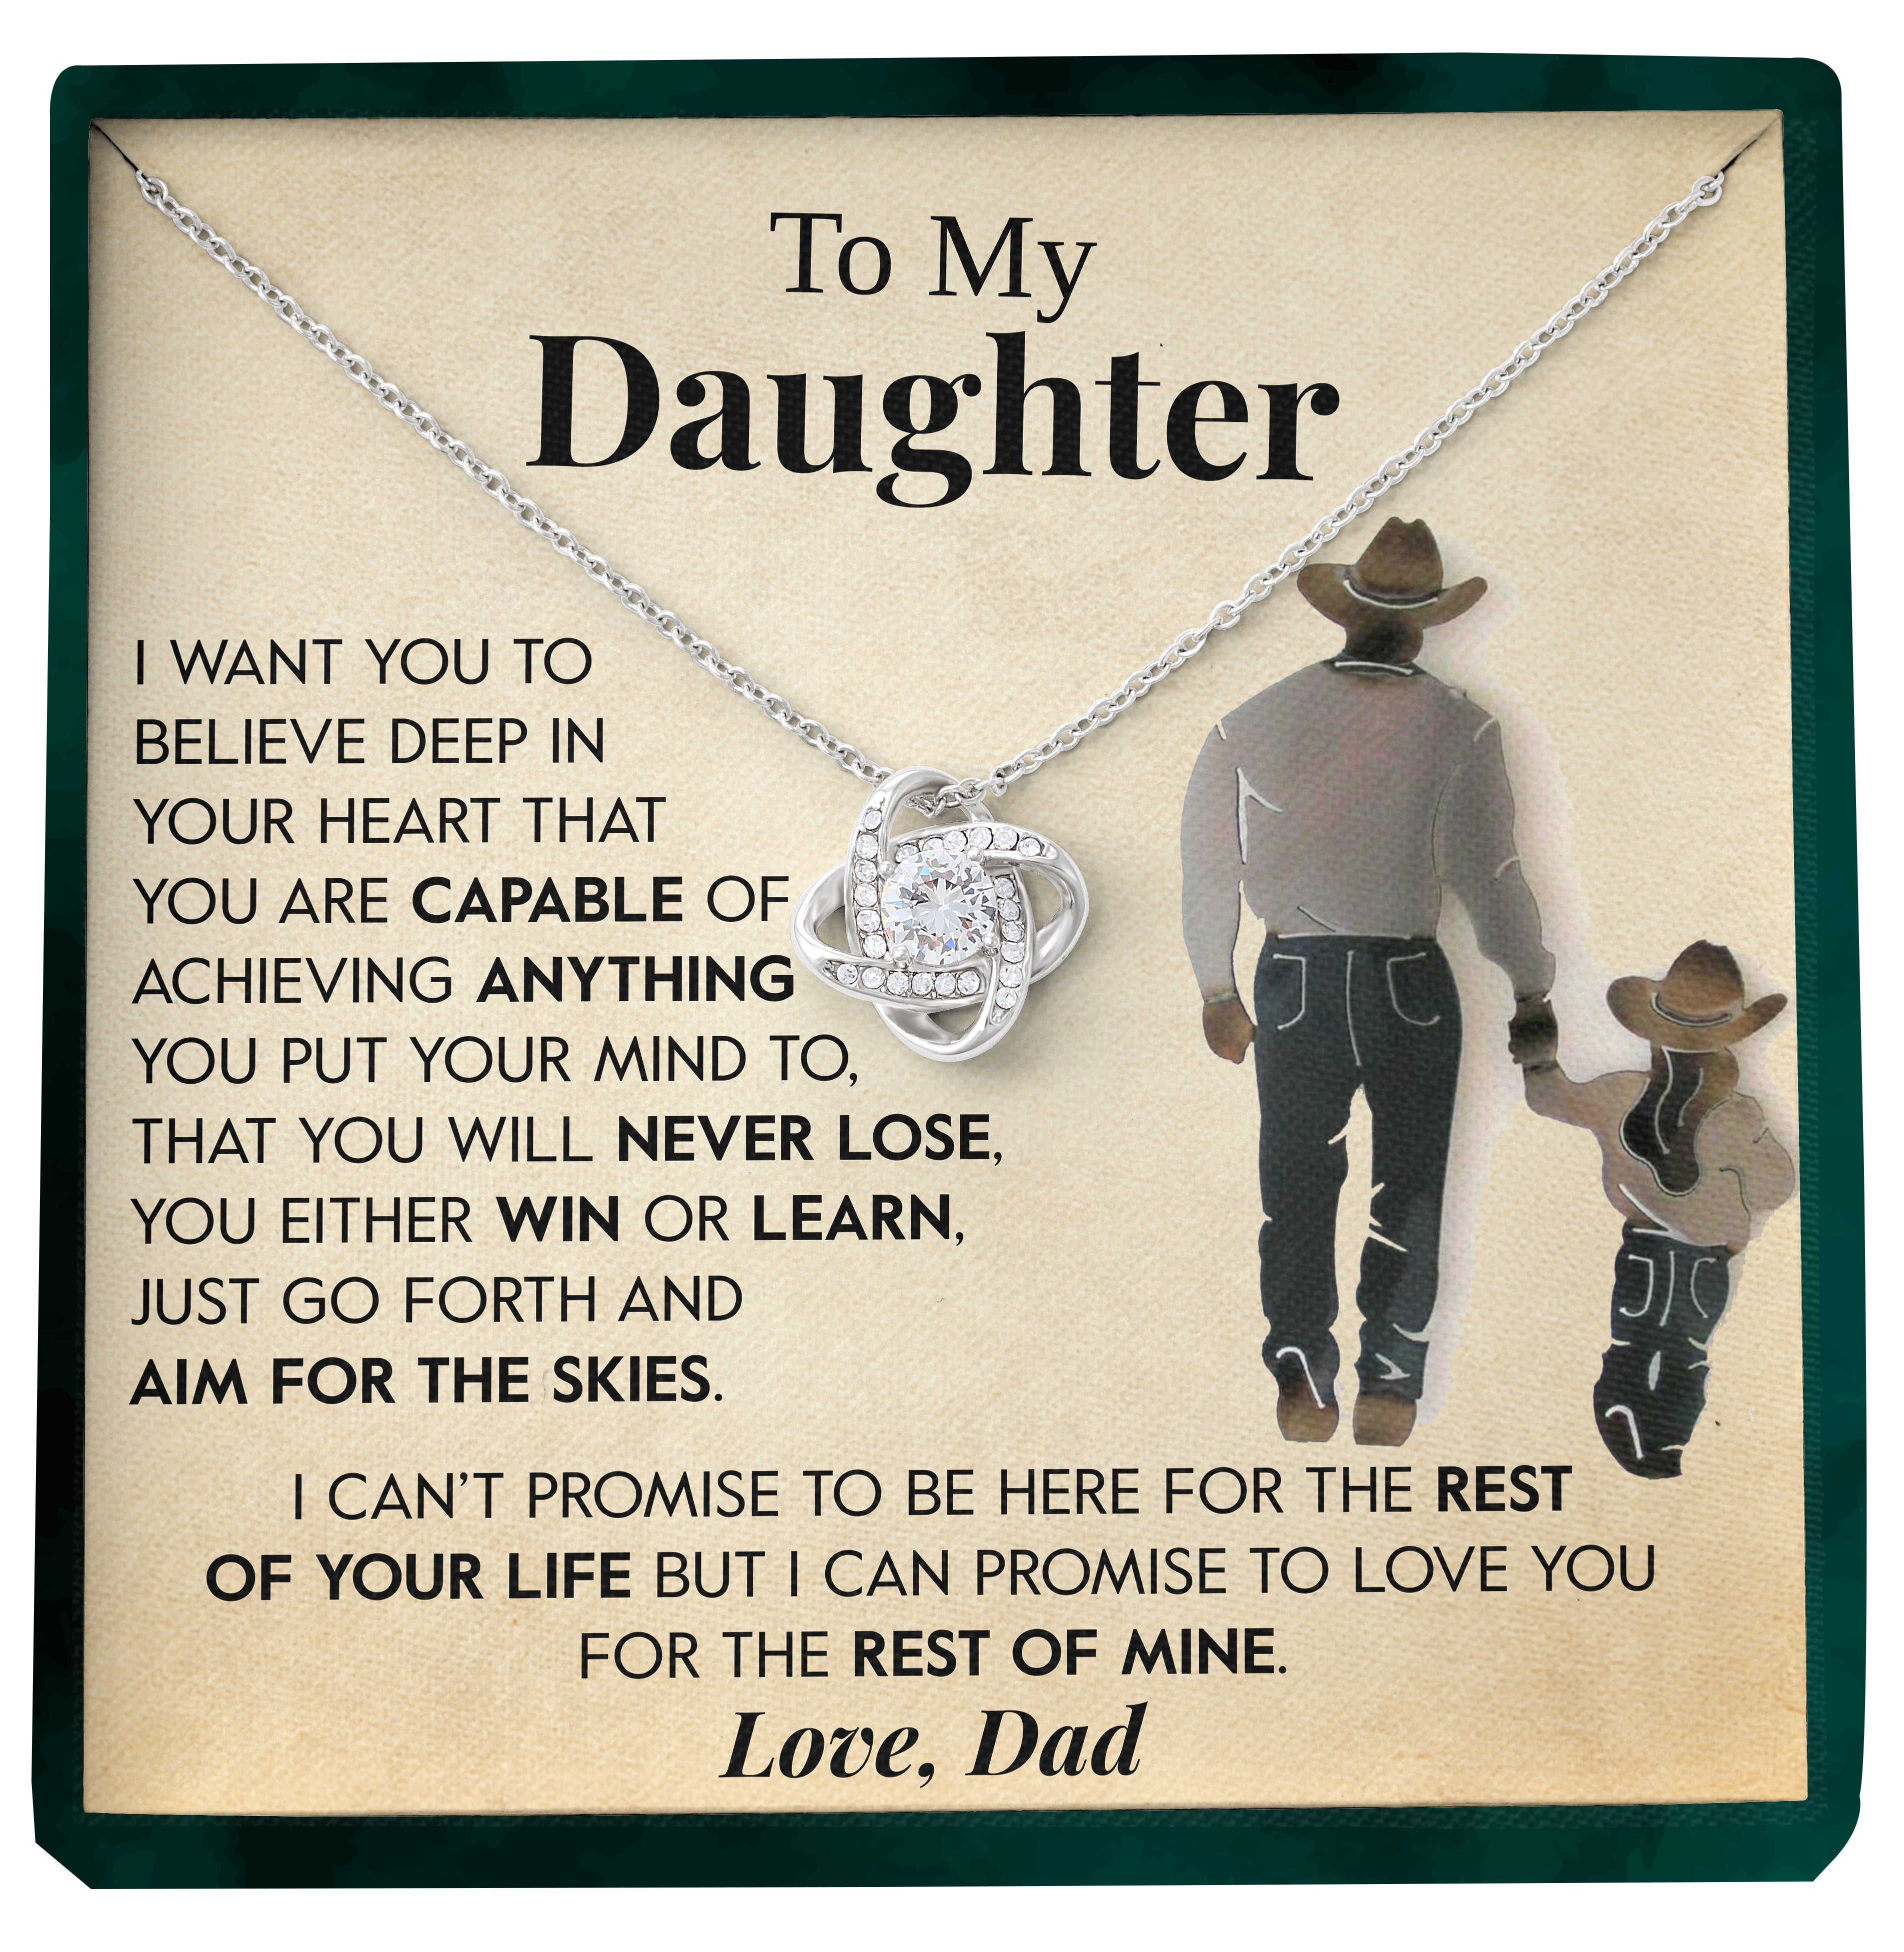 To My Daughter | "Aim For The Skies" | Love Knot Necklace